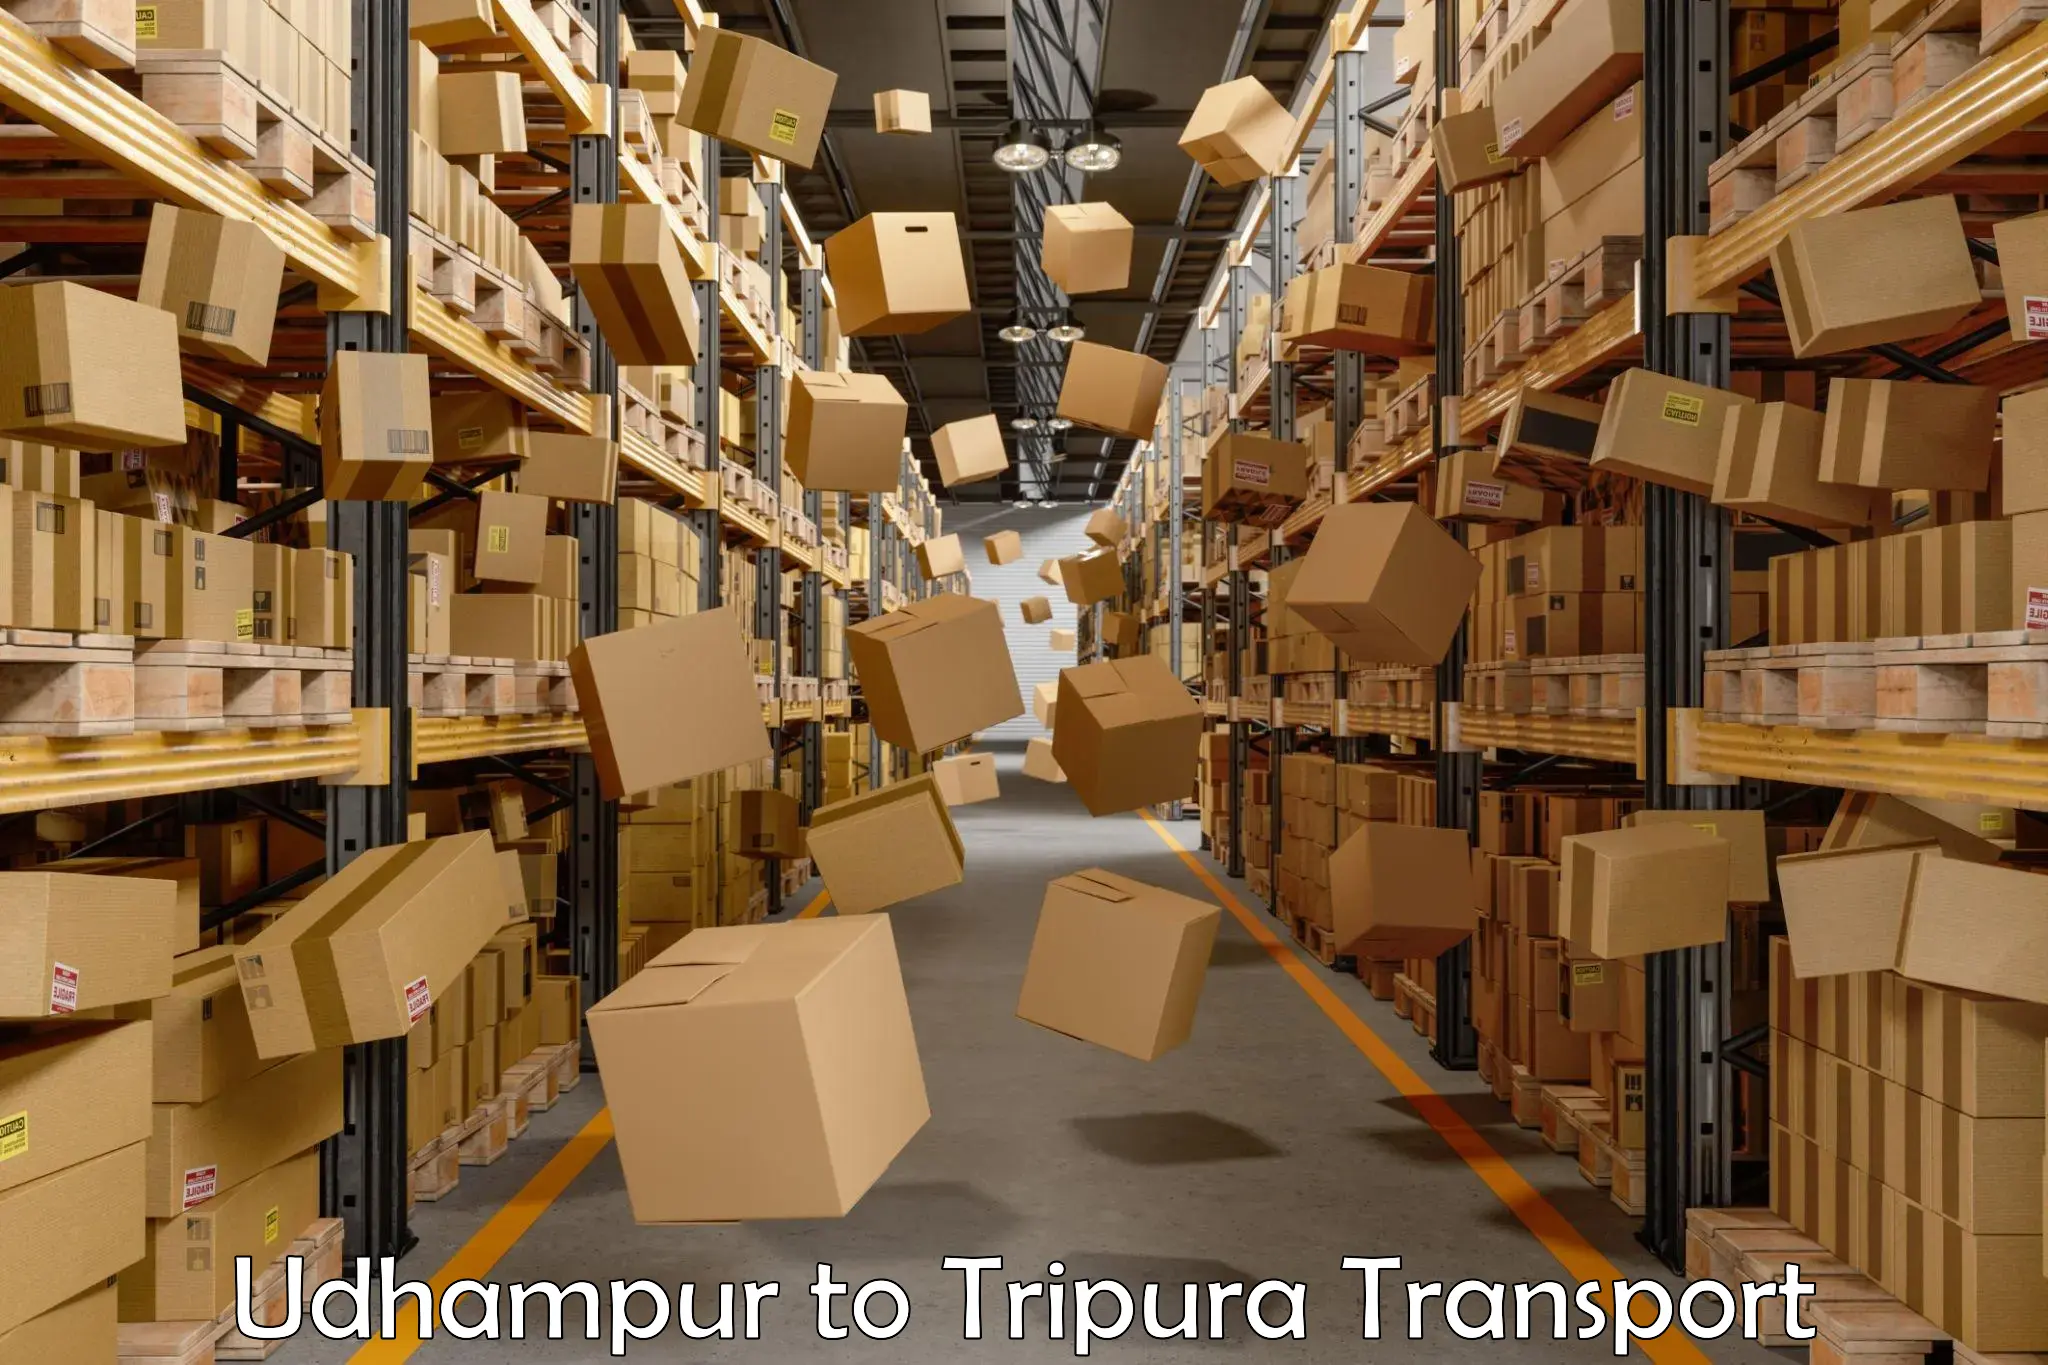 Daily transport service in Udhampur to Udaipur Tripura